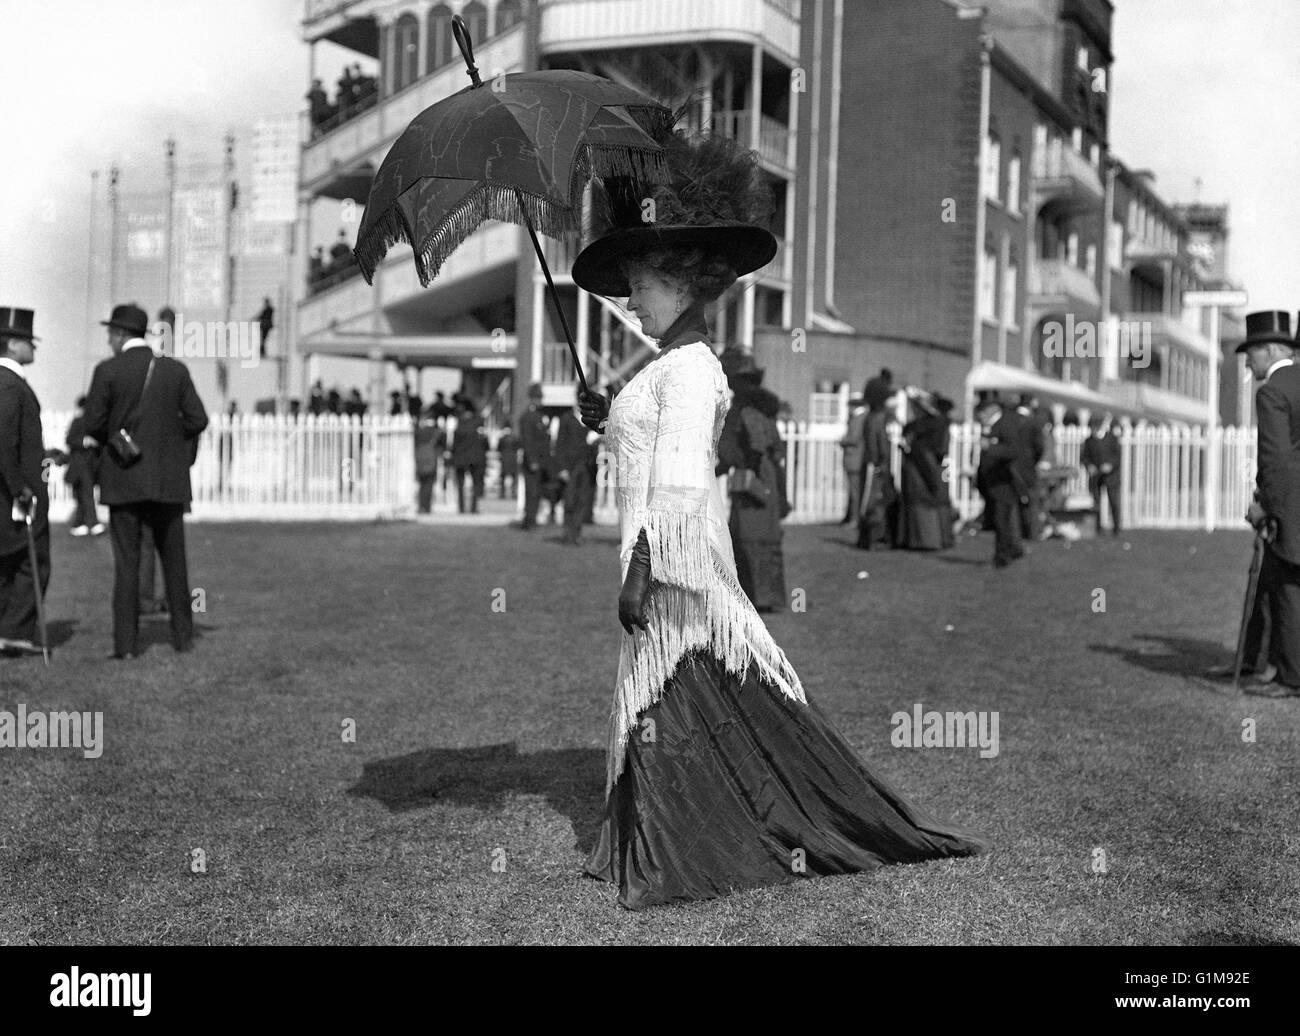 Mrs Ashton Harrison at Ascot races. ... Horse Racing - Royal Ascot - 1910 ... 17-06-1910 ... Unknown ... UK ... Photo credit should read: PA/Unique Reference No. 1628233 ... Stock Photo